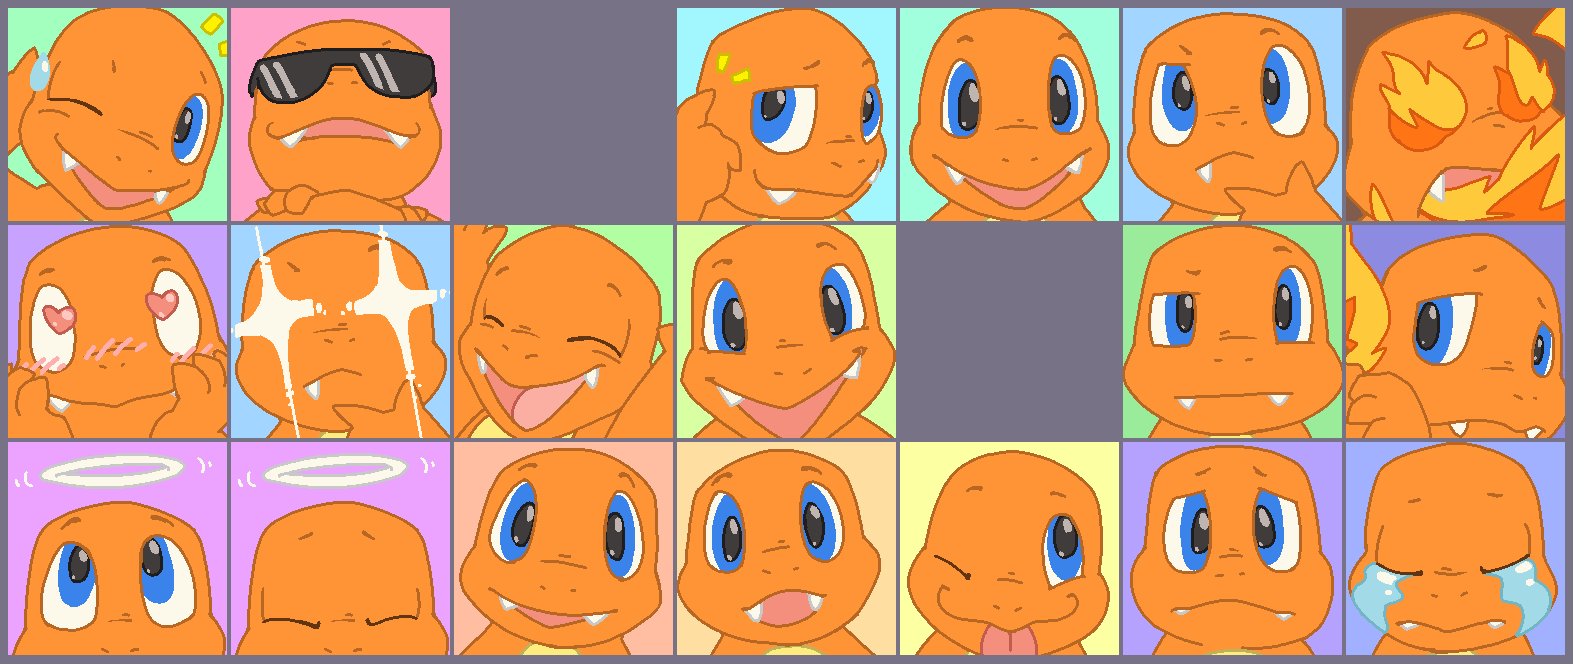 icon commission for kilkakon he wanted his cool charmander character done w...